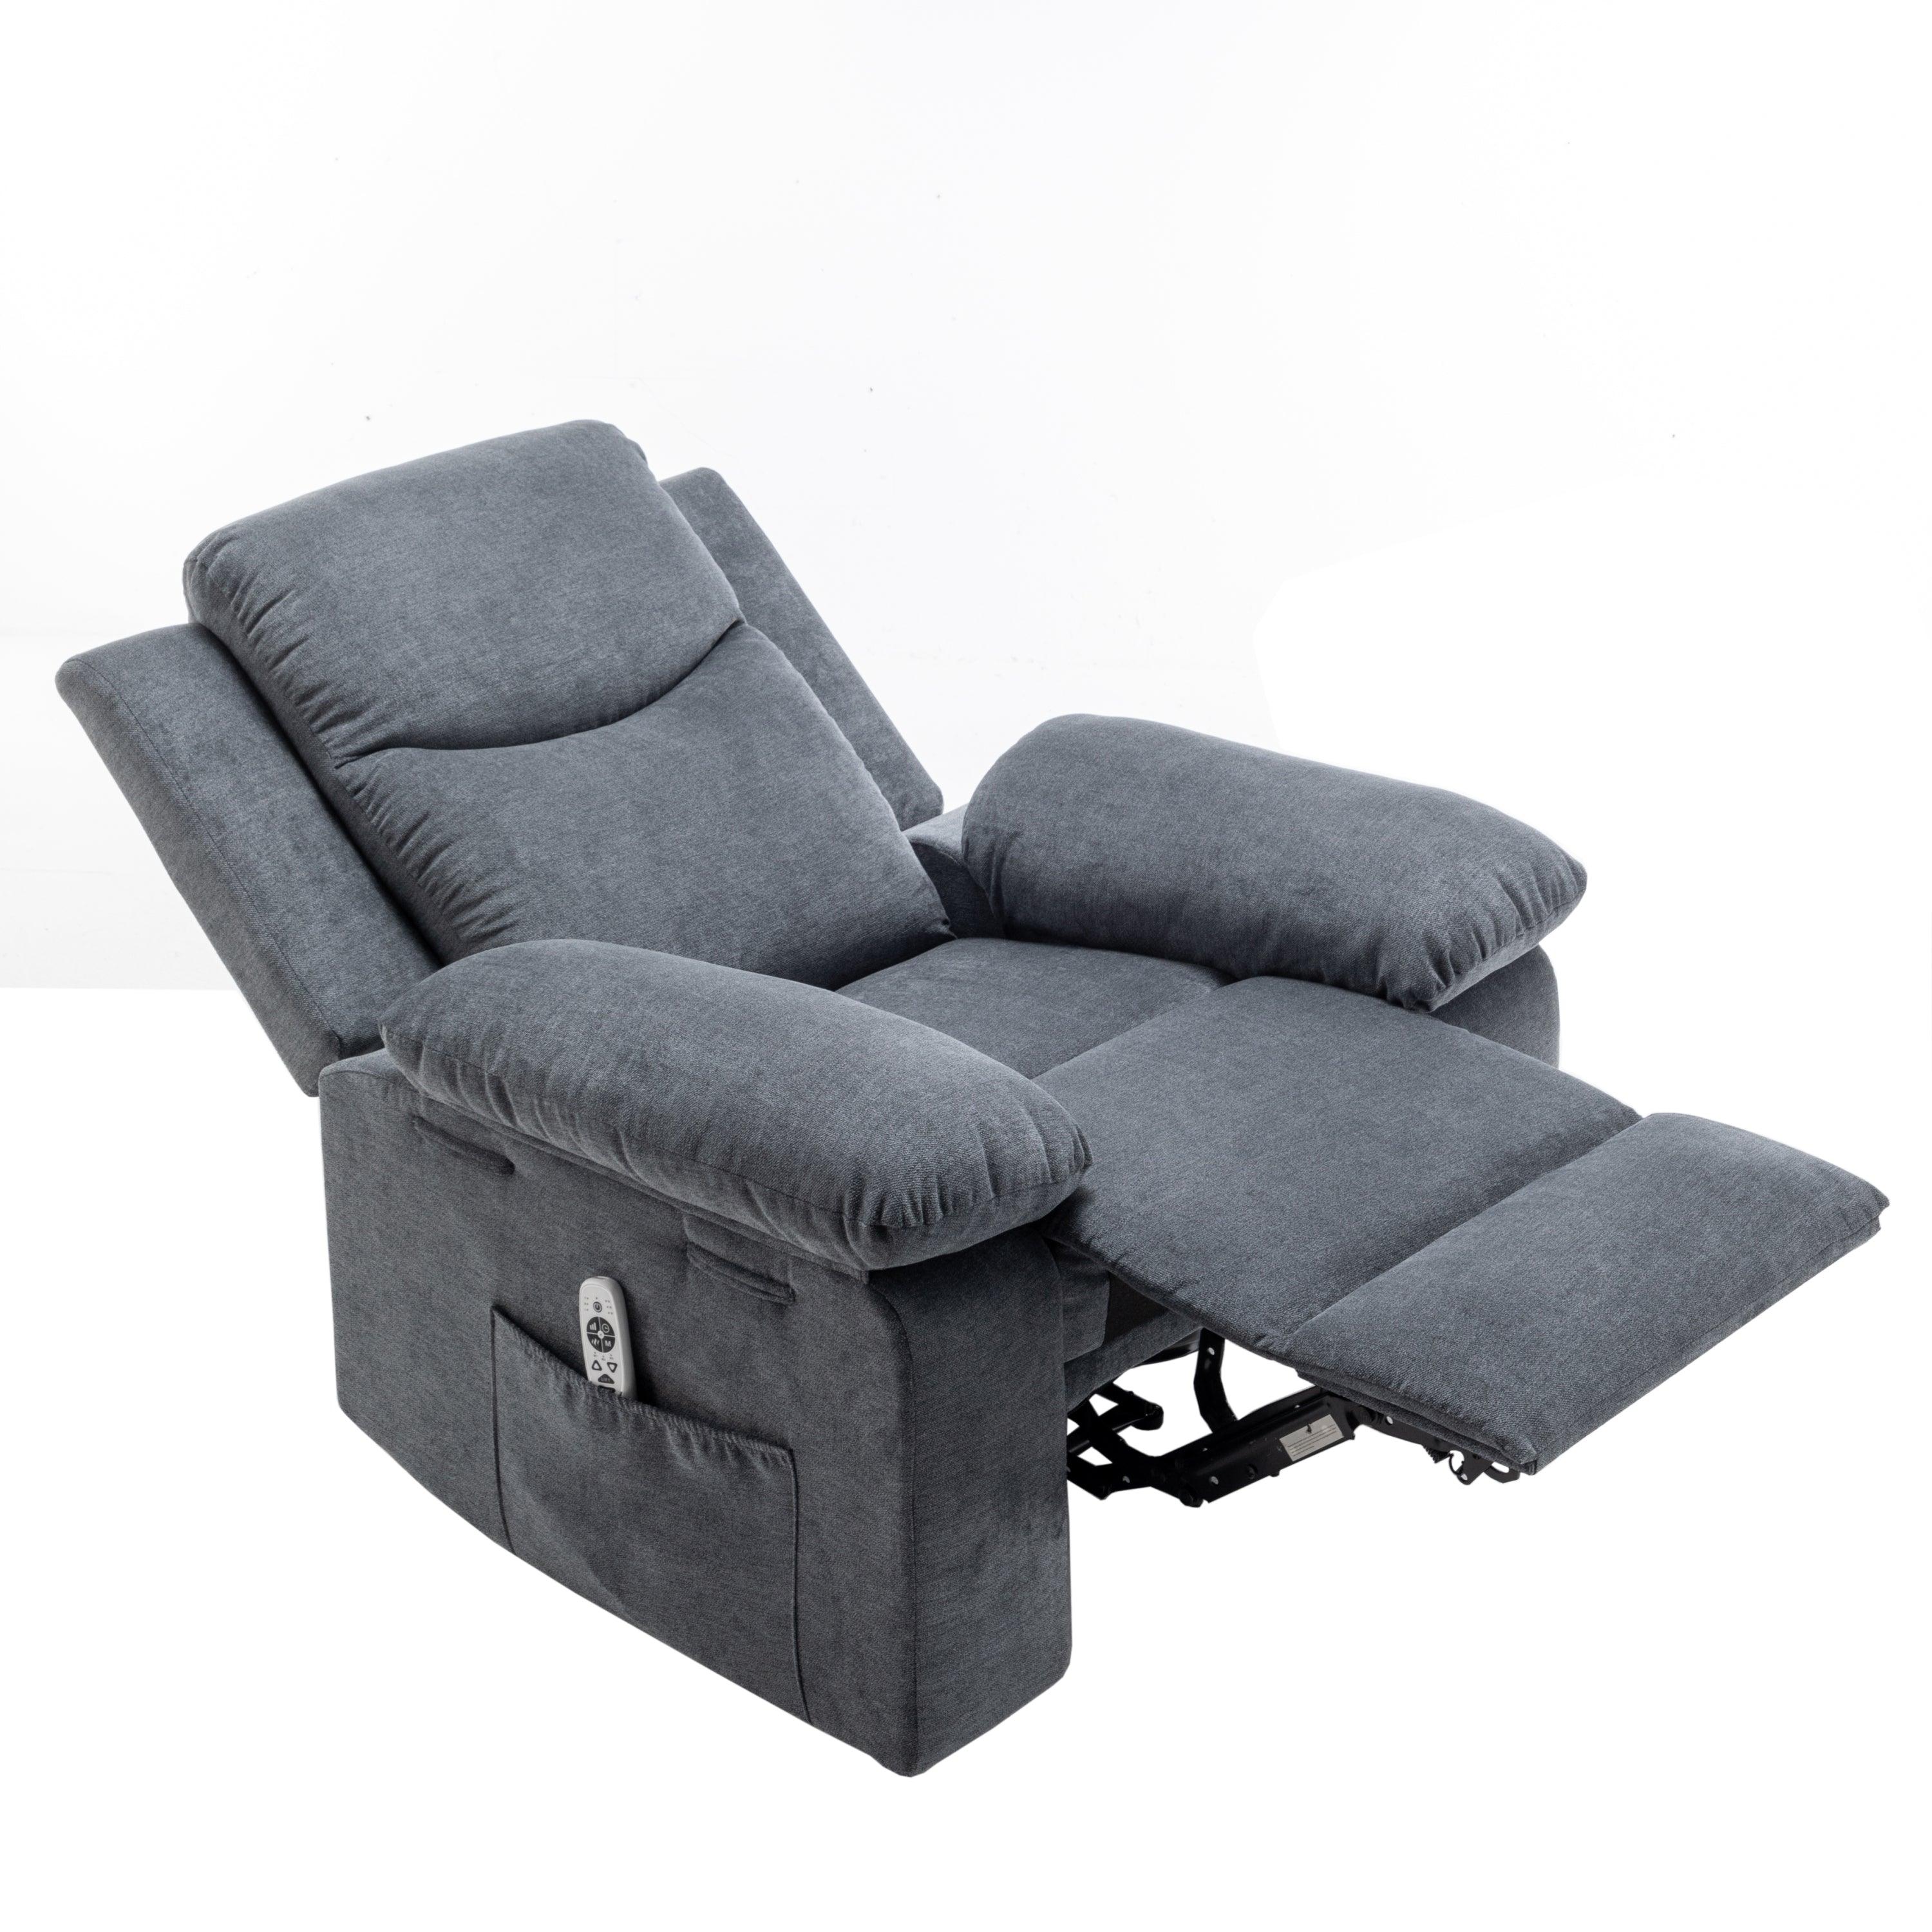 🆓🚛 Pustin Power Fabric Recliner Chair With Adjustable Massage Functions - Dark Gray